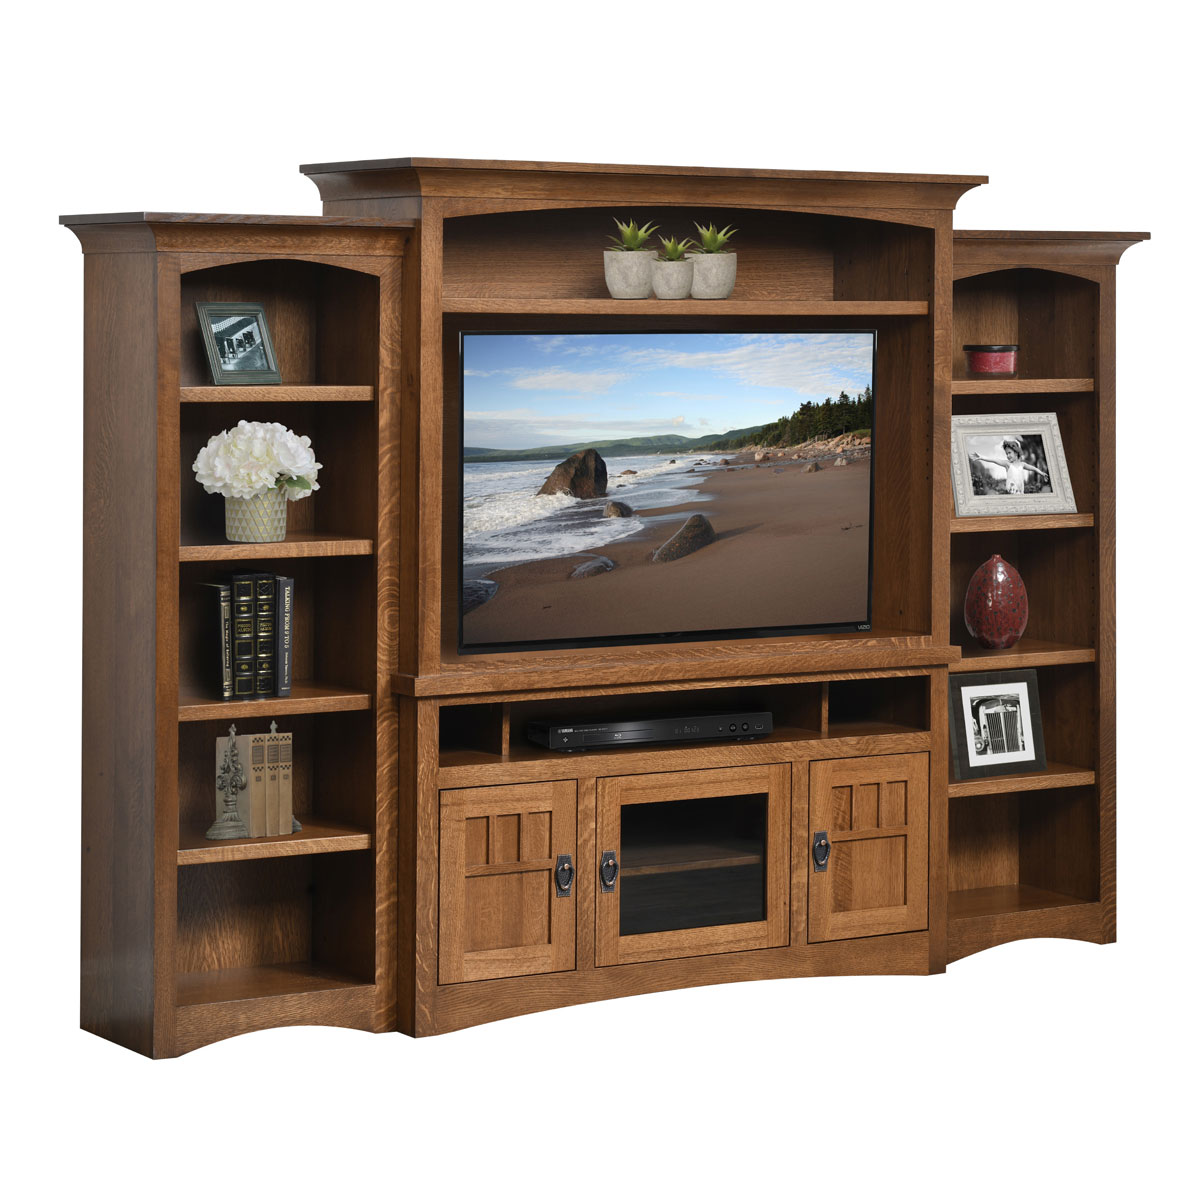 Liberty Mission Entertainment Center shown in Rustic Quartersawn White Oak with OCS-113 Michaels Stain with Optional Bookcases.